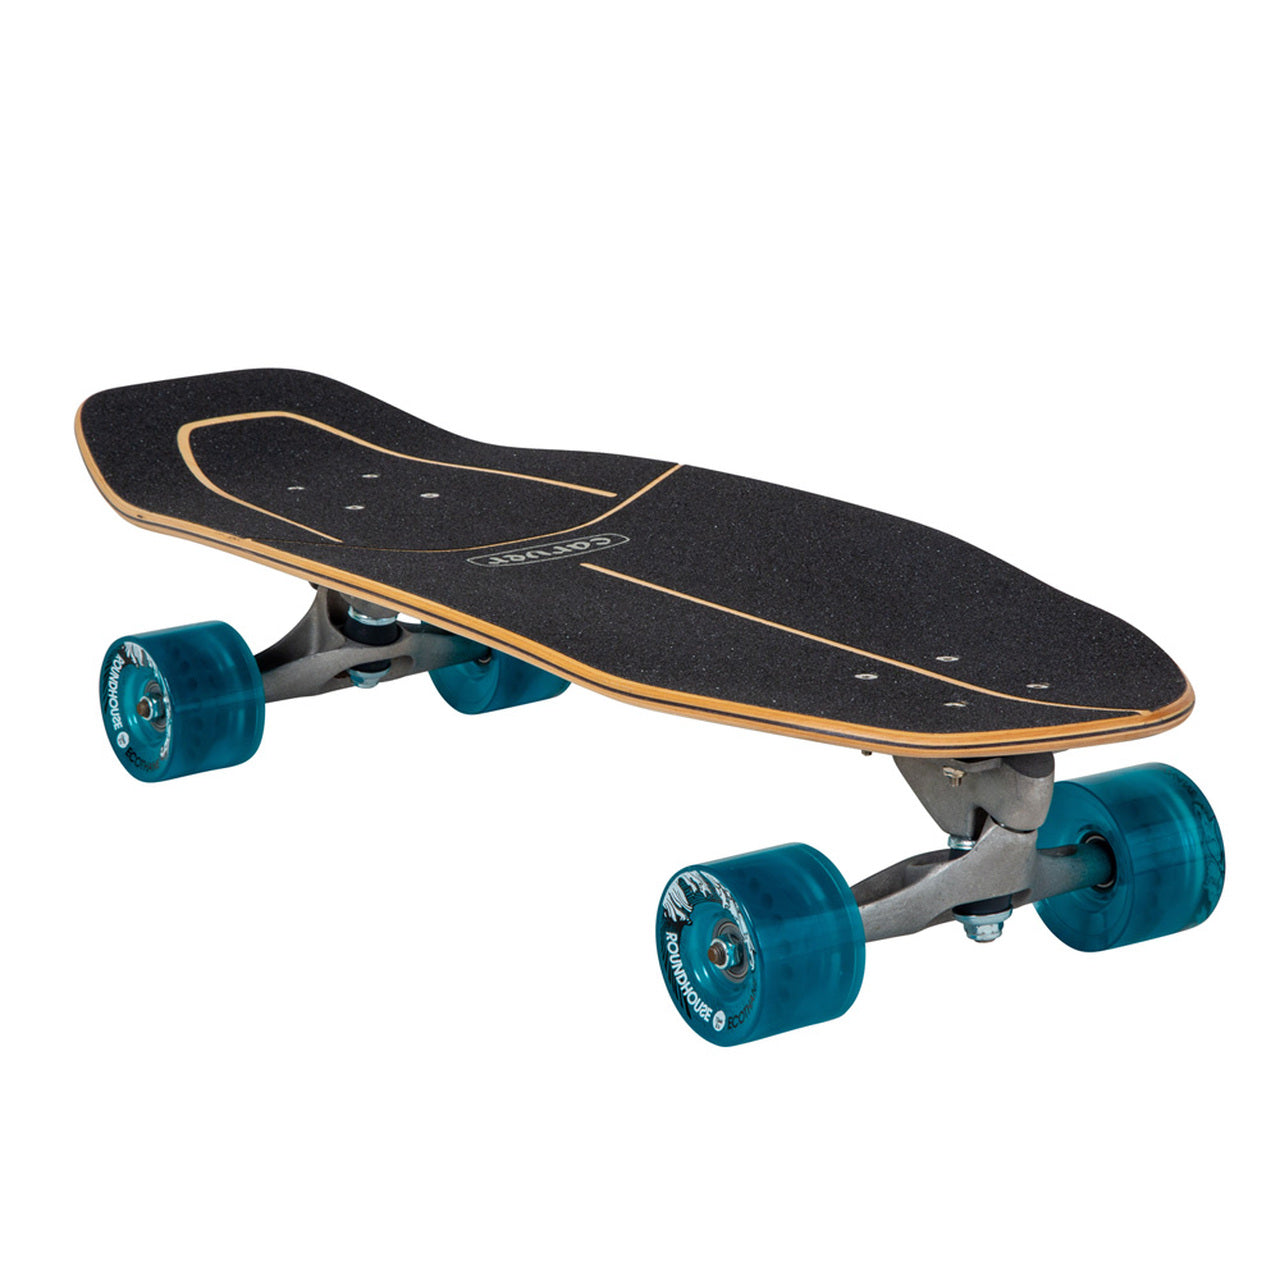 Carver Skateboards - The Super Surfer Series - two highly maneuverable  boards for any rider looking to get serious about their surfing and  performance training. The 28” Super Snapper and the 32”